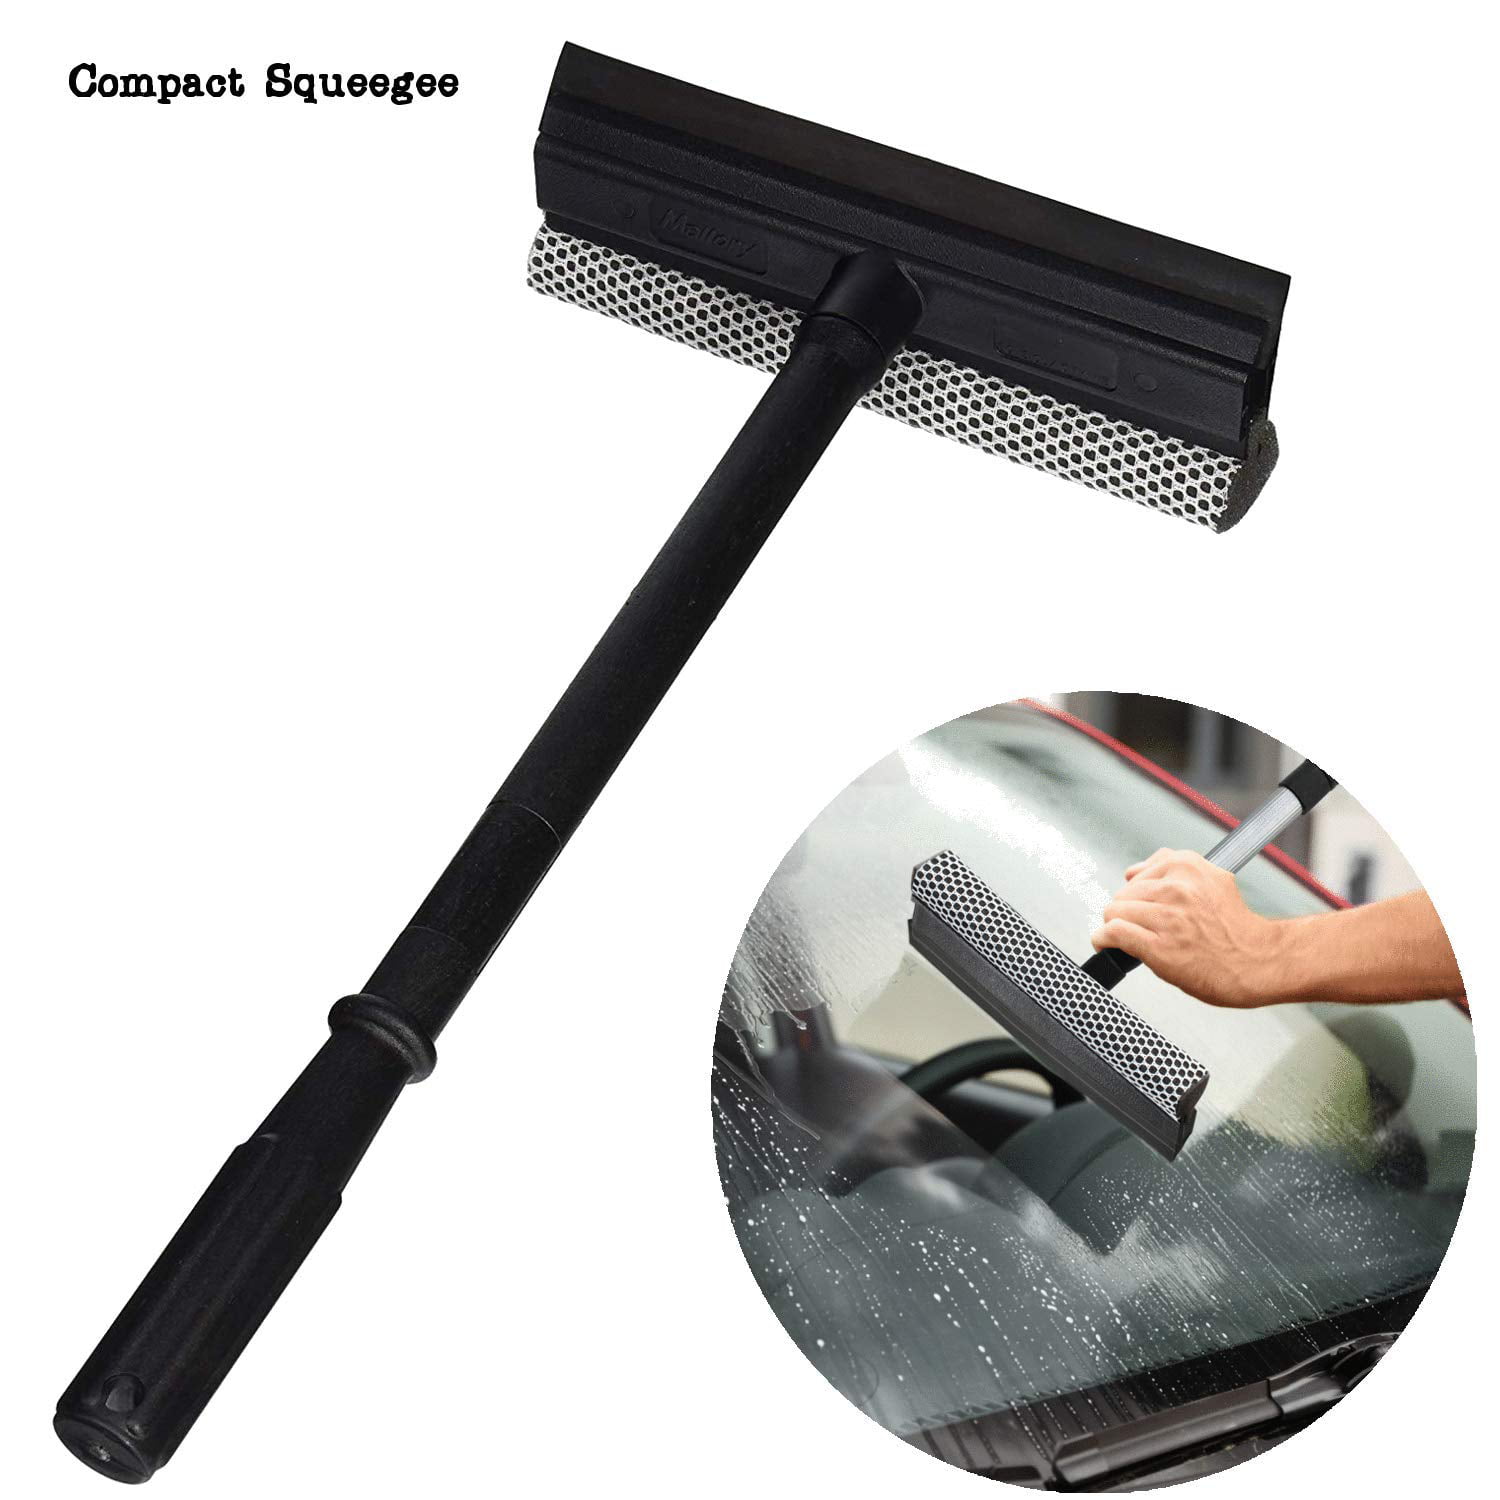 ARTIPOLY 4-12FT Car Cleaning Kit The Ultimate RV Truck Washing Set with Soft Brush Tire Window Squeegee Wash Mitt Microfiber at MechanicSurplus.com